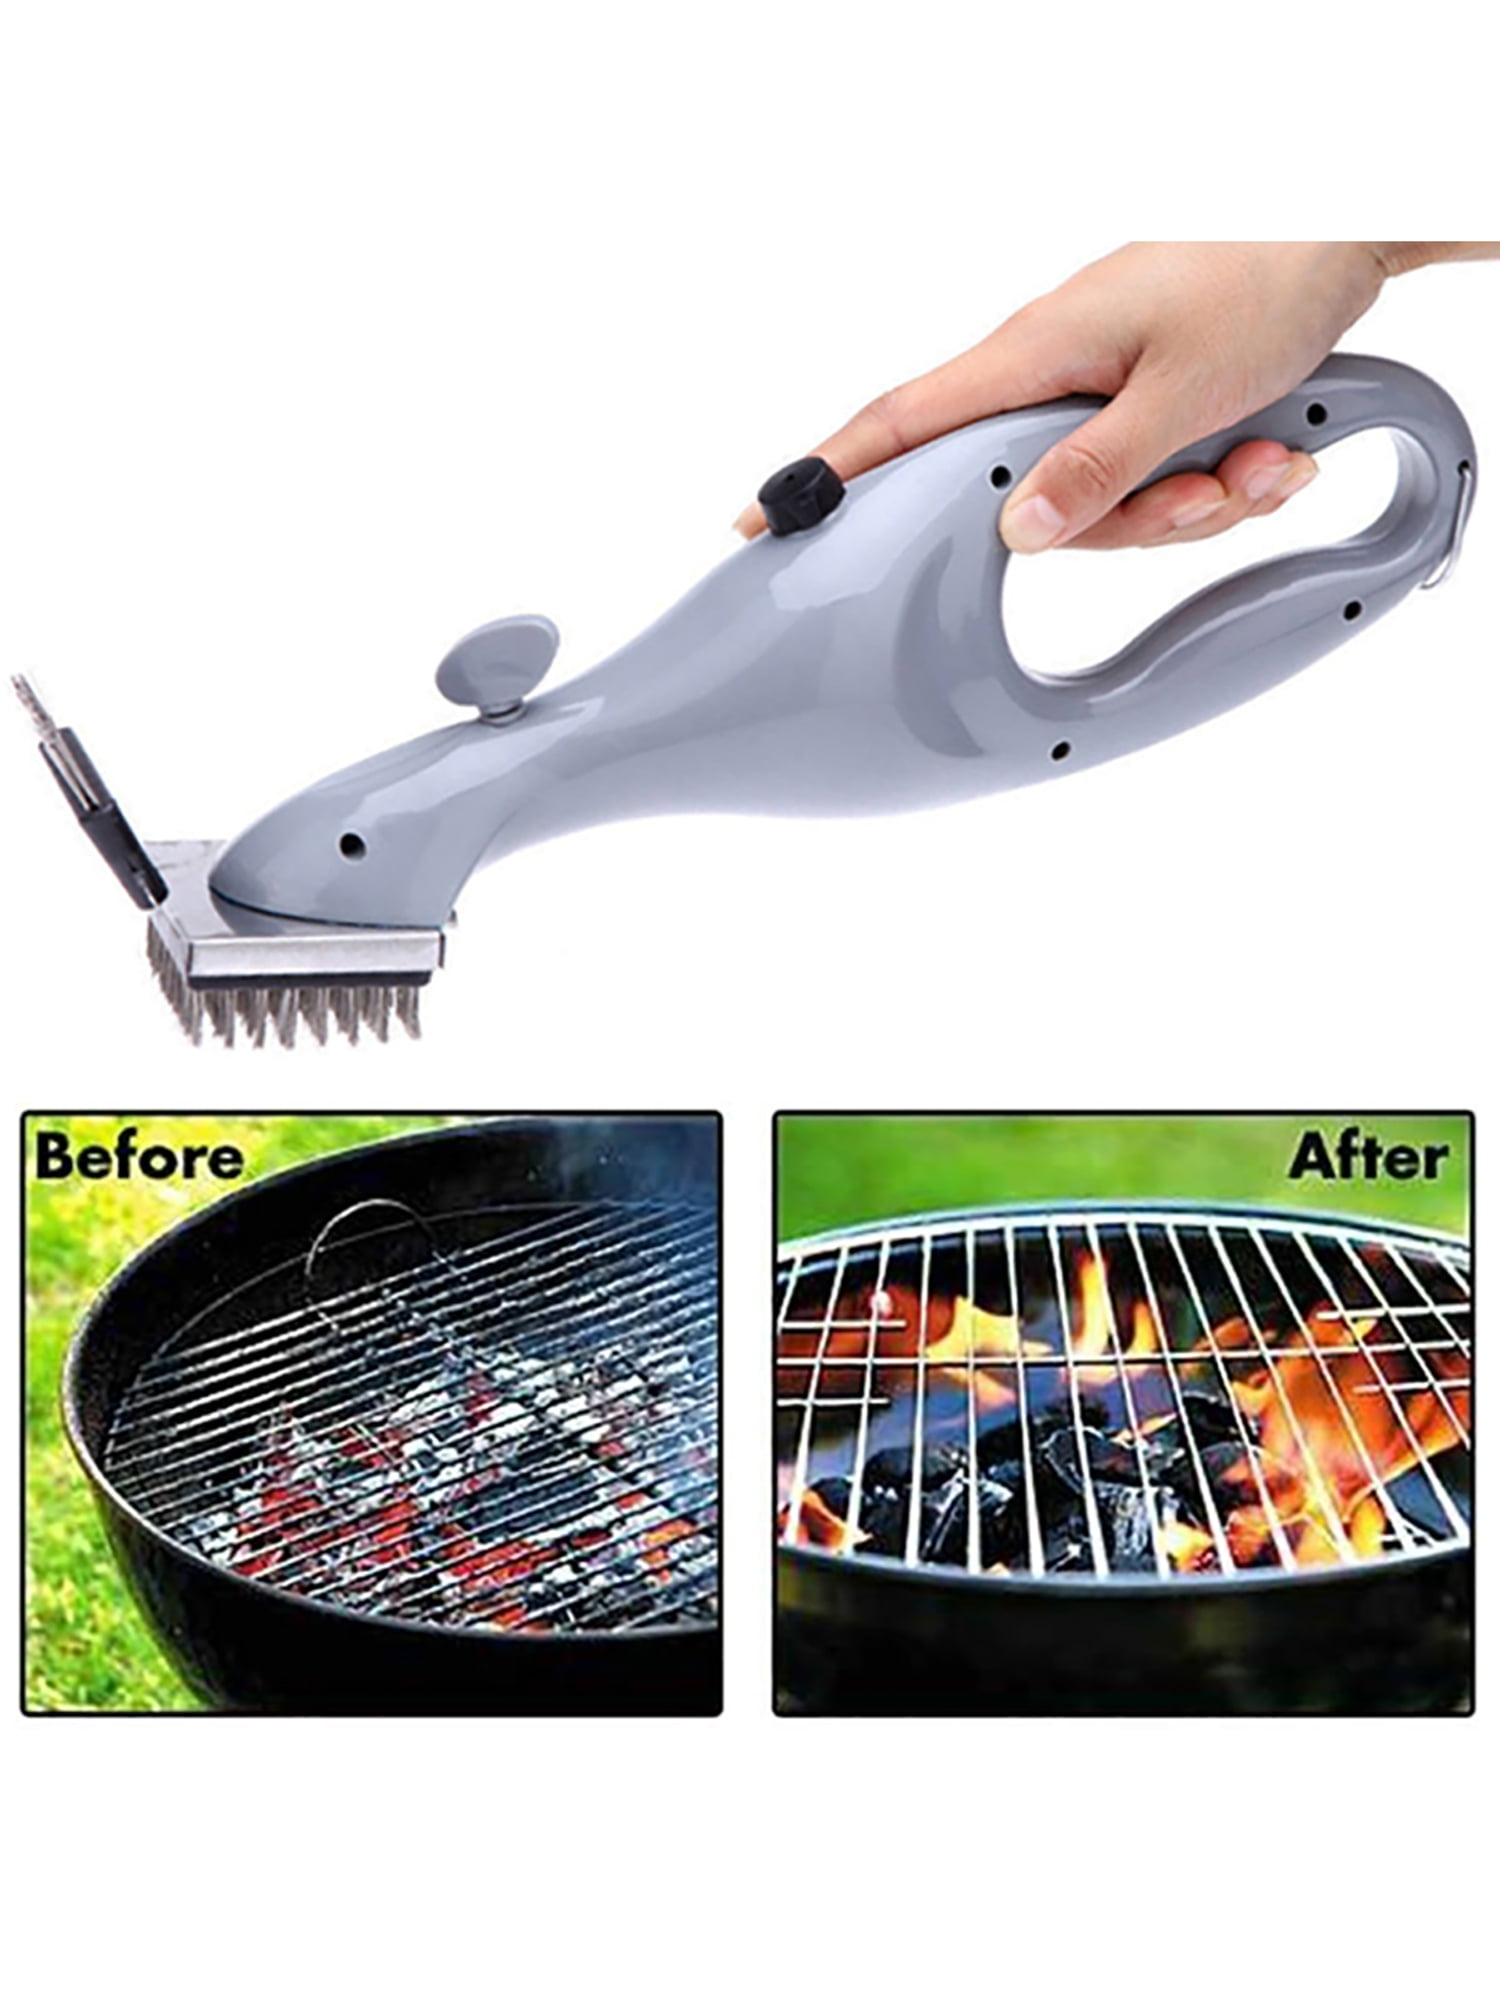 Barbecue Stainless Steel BBQ Cleaning Brush Outdoor Grill Power of Steam Cooking 